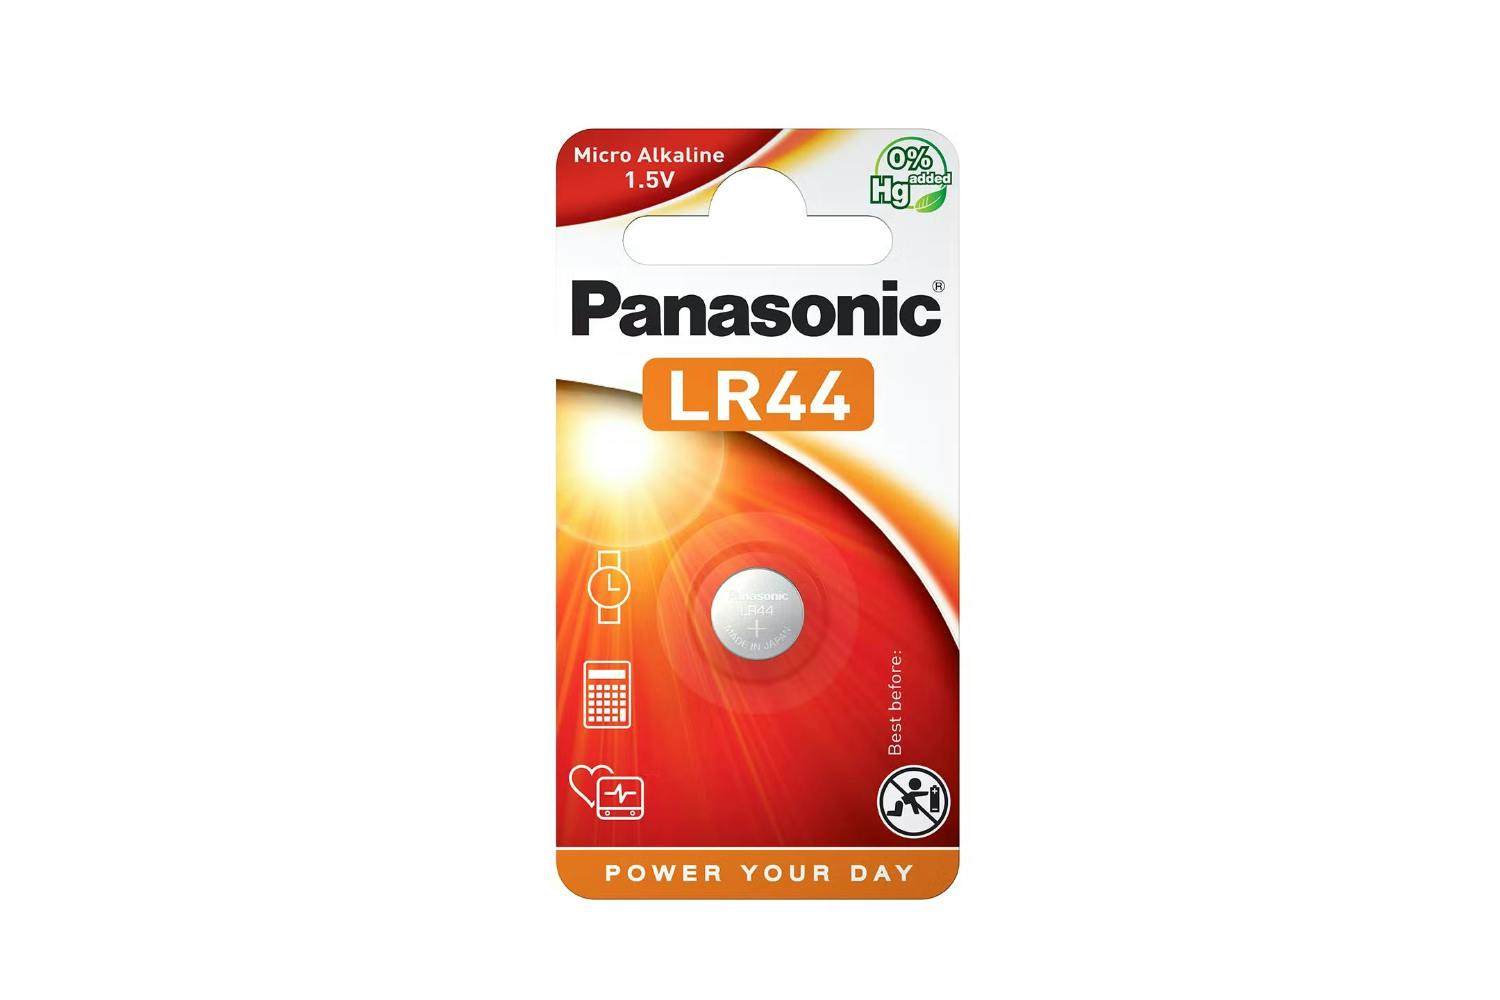 Panasonic Micro Alkaline Coin Cell Battery